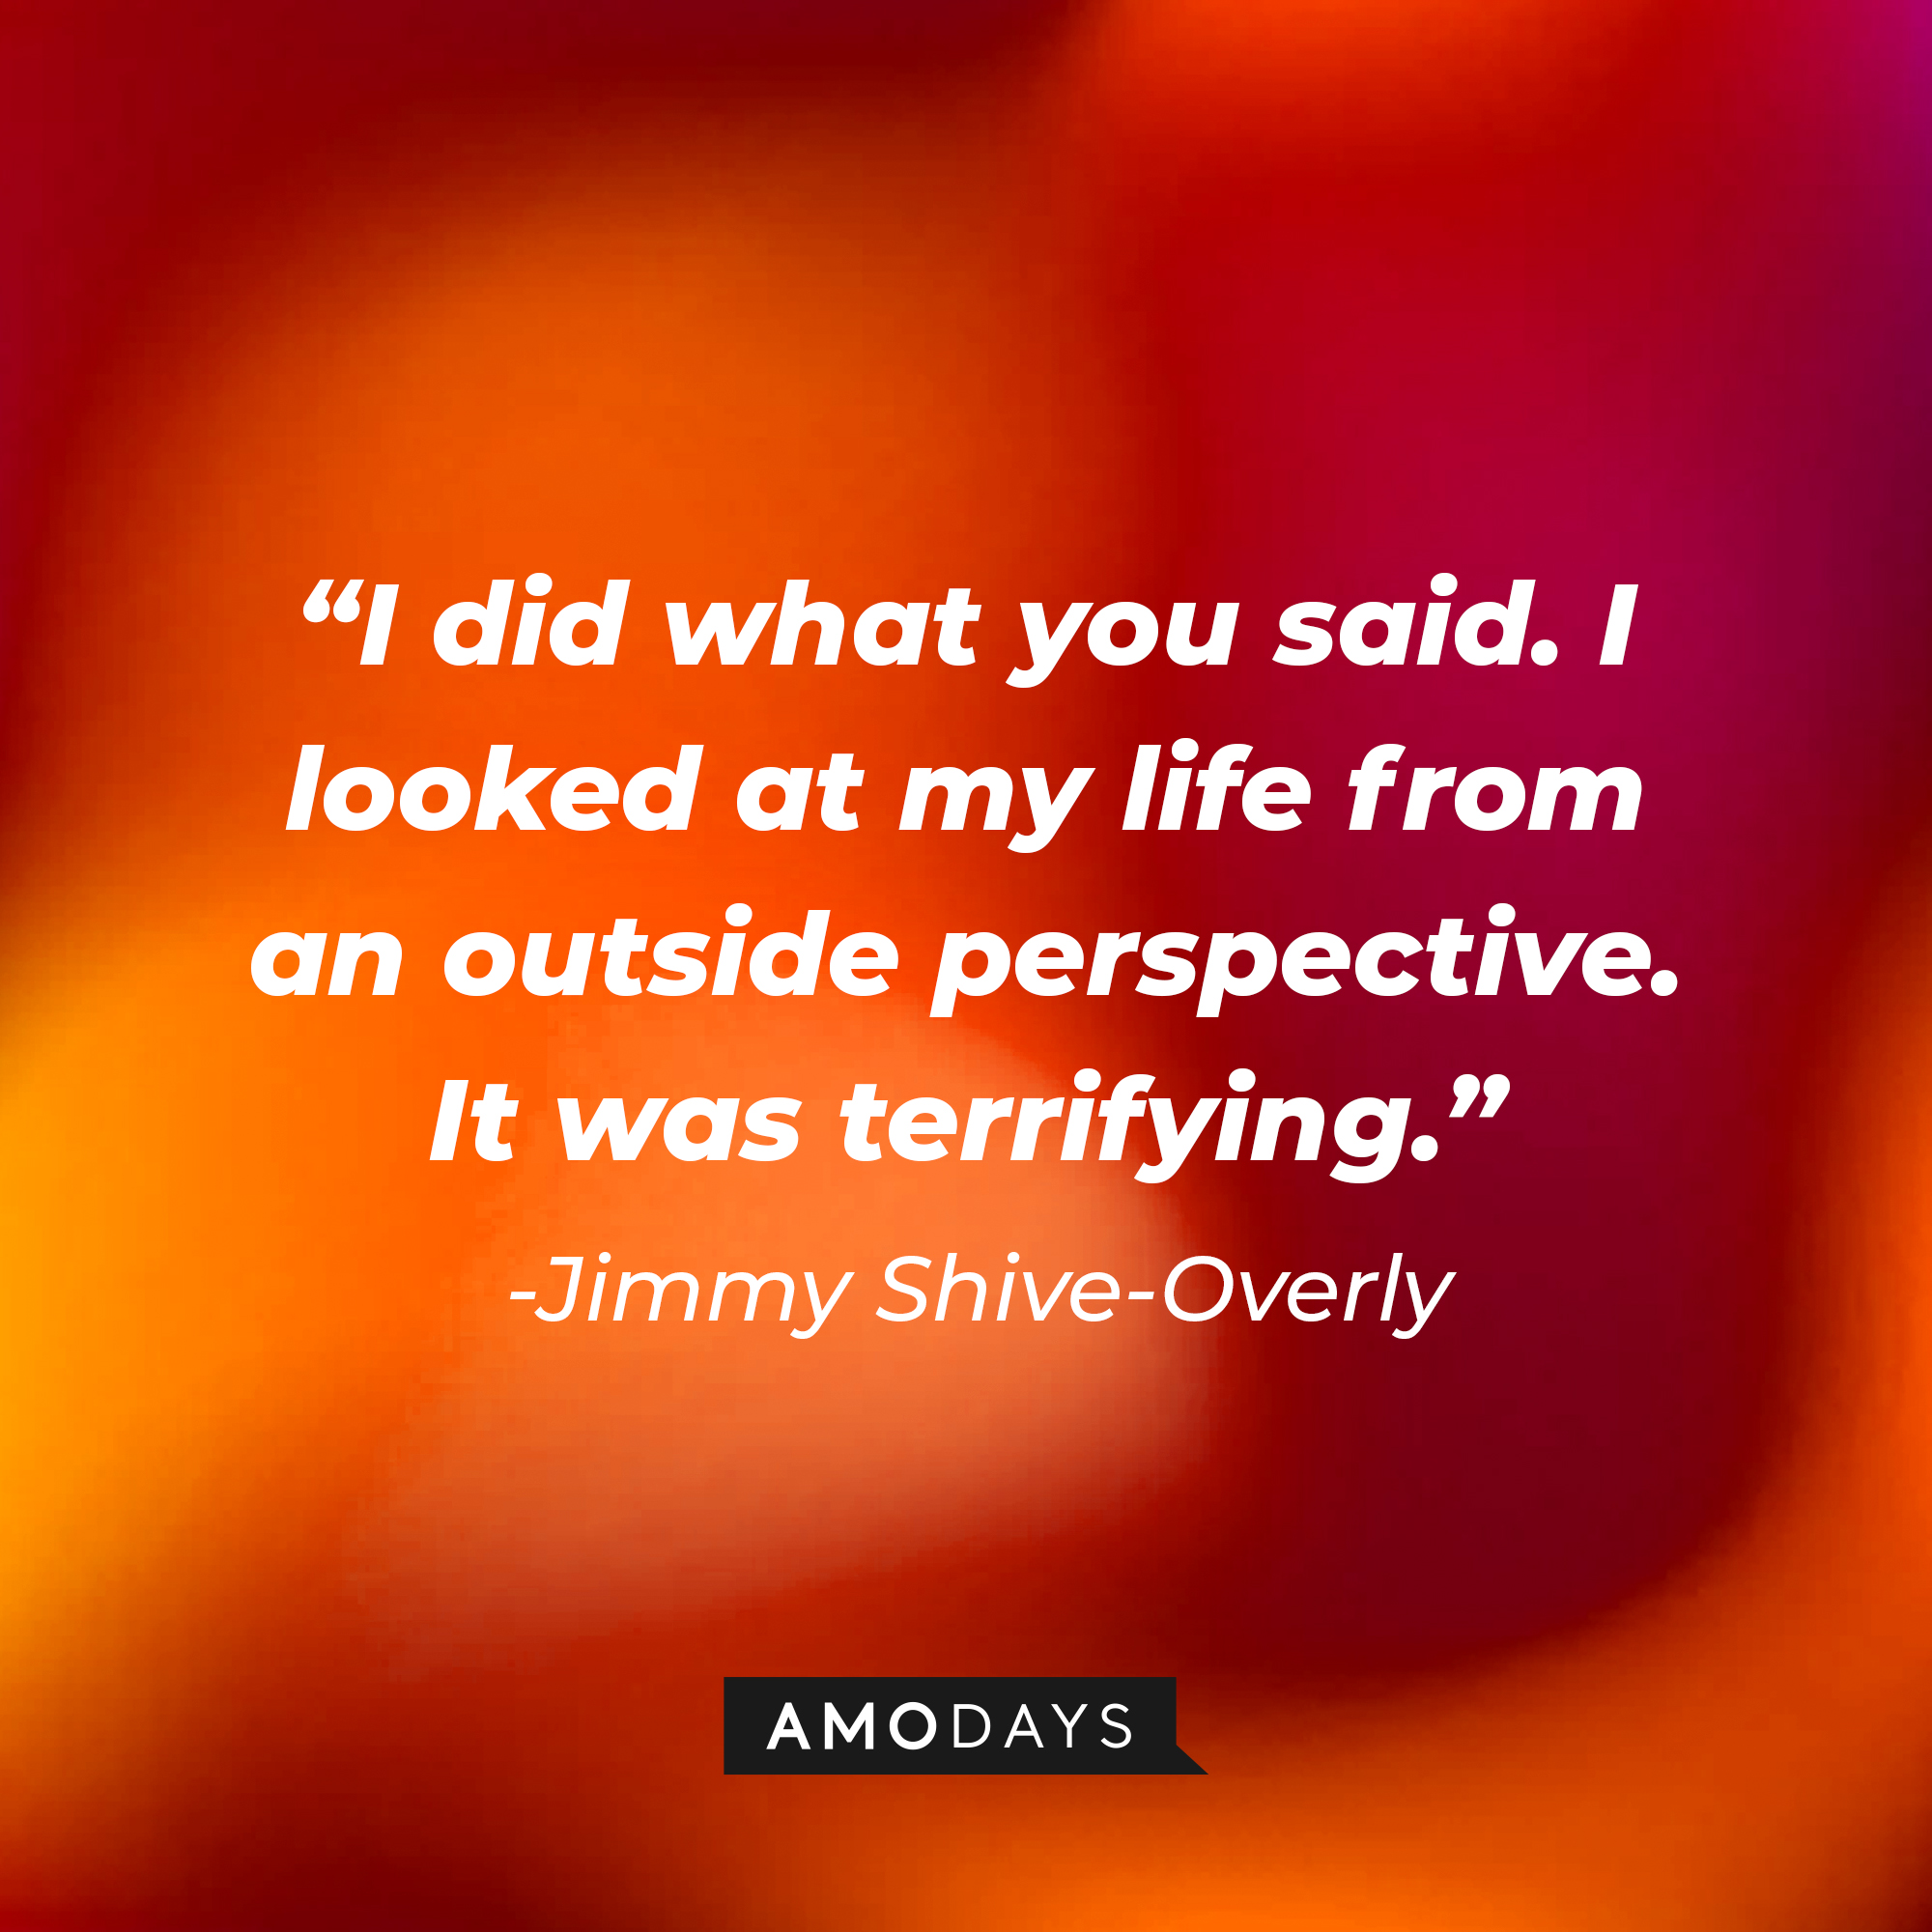 Jimmy Shive-Overly’s quote: “I did what you said. I looked at my life from an outside perspective. It was terrifying.” | Source: AmoDays